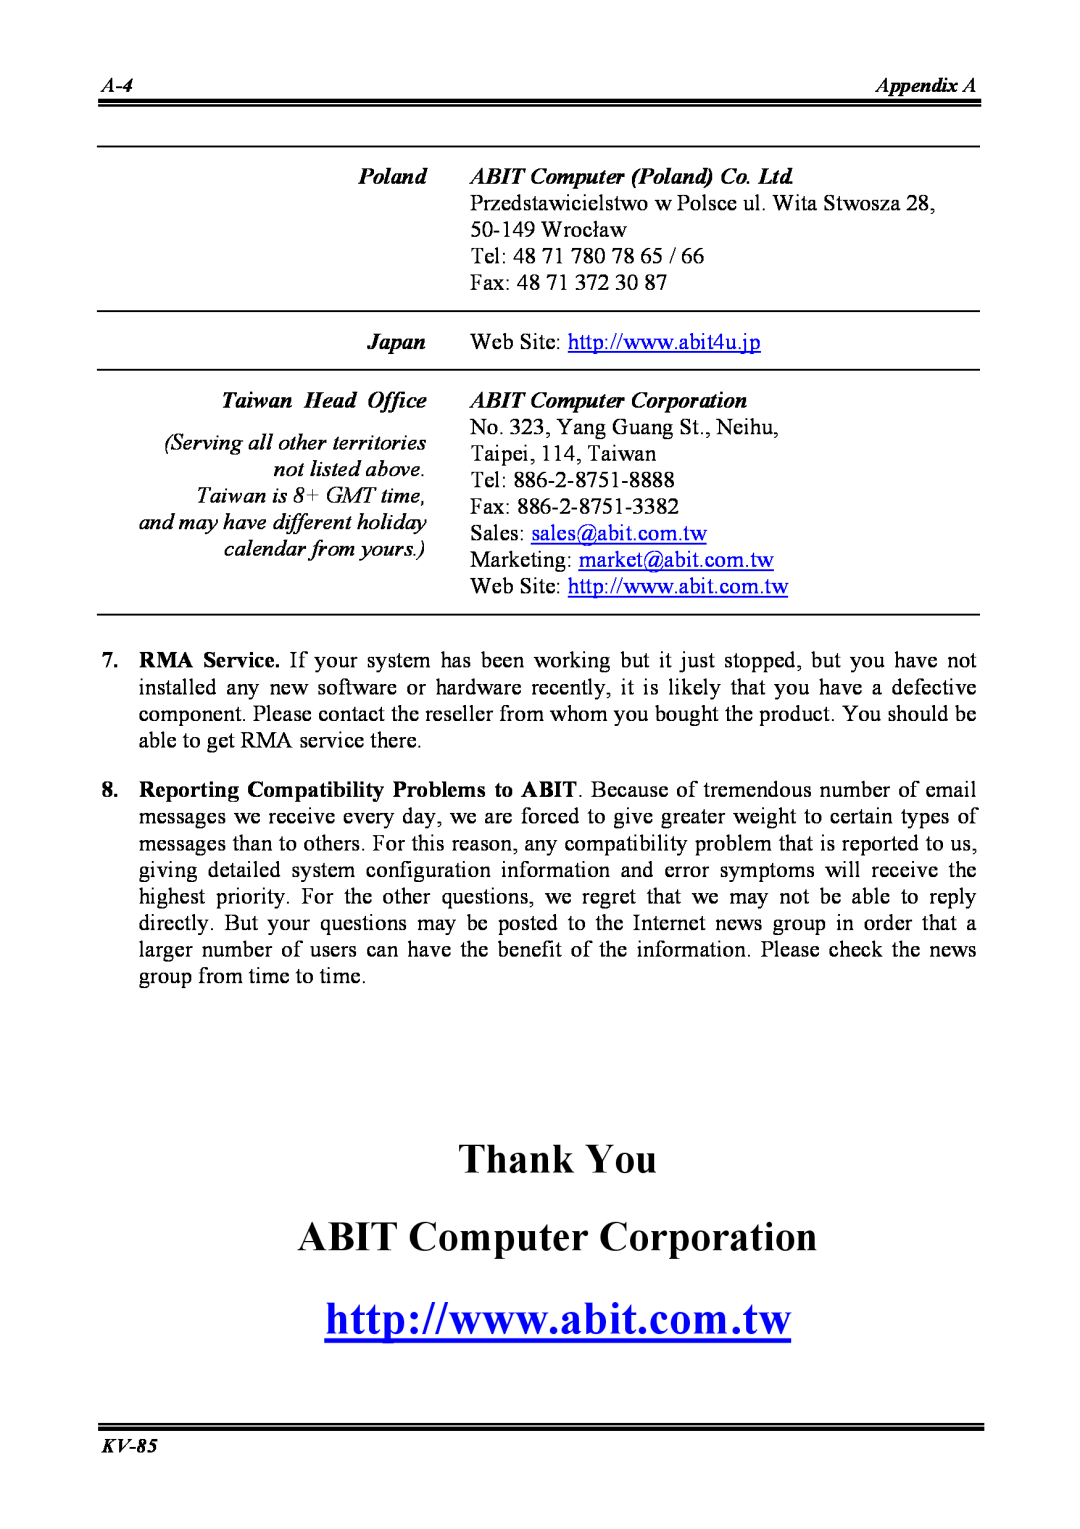 Abit KV-85 user manual Thank You ABIT Computer Corporation, Serving all other territories, No. 323, Yang Guang St., Neihu 